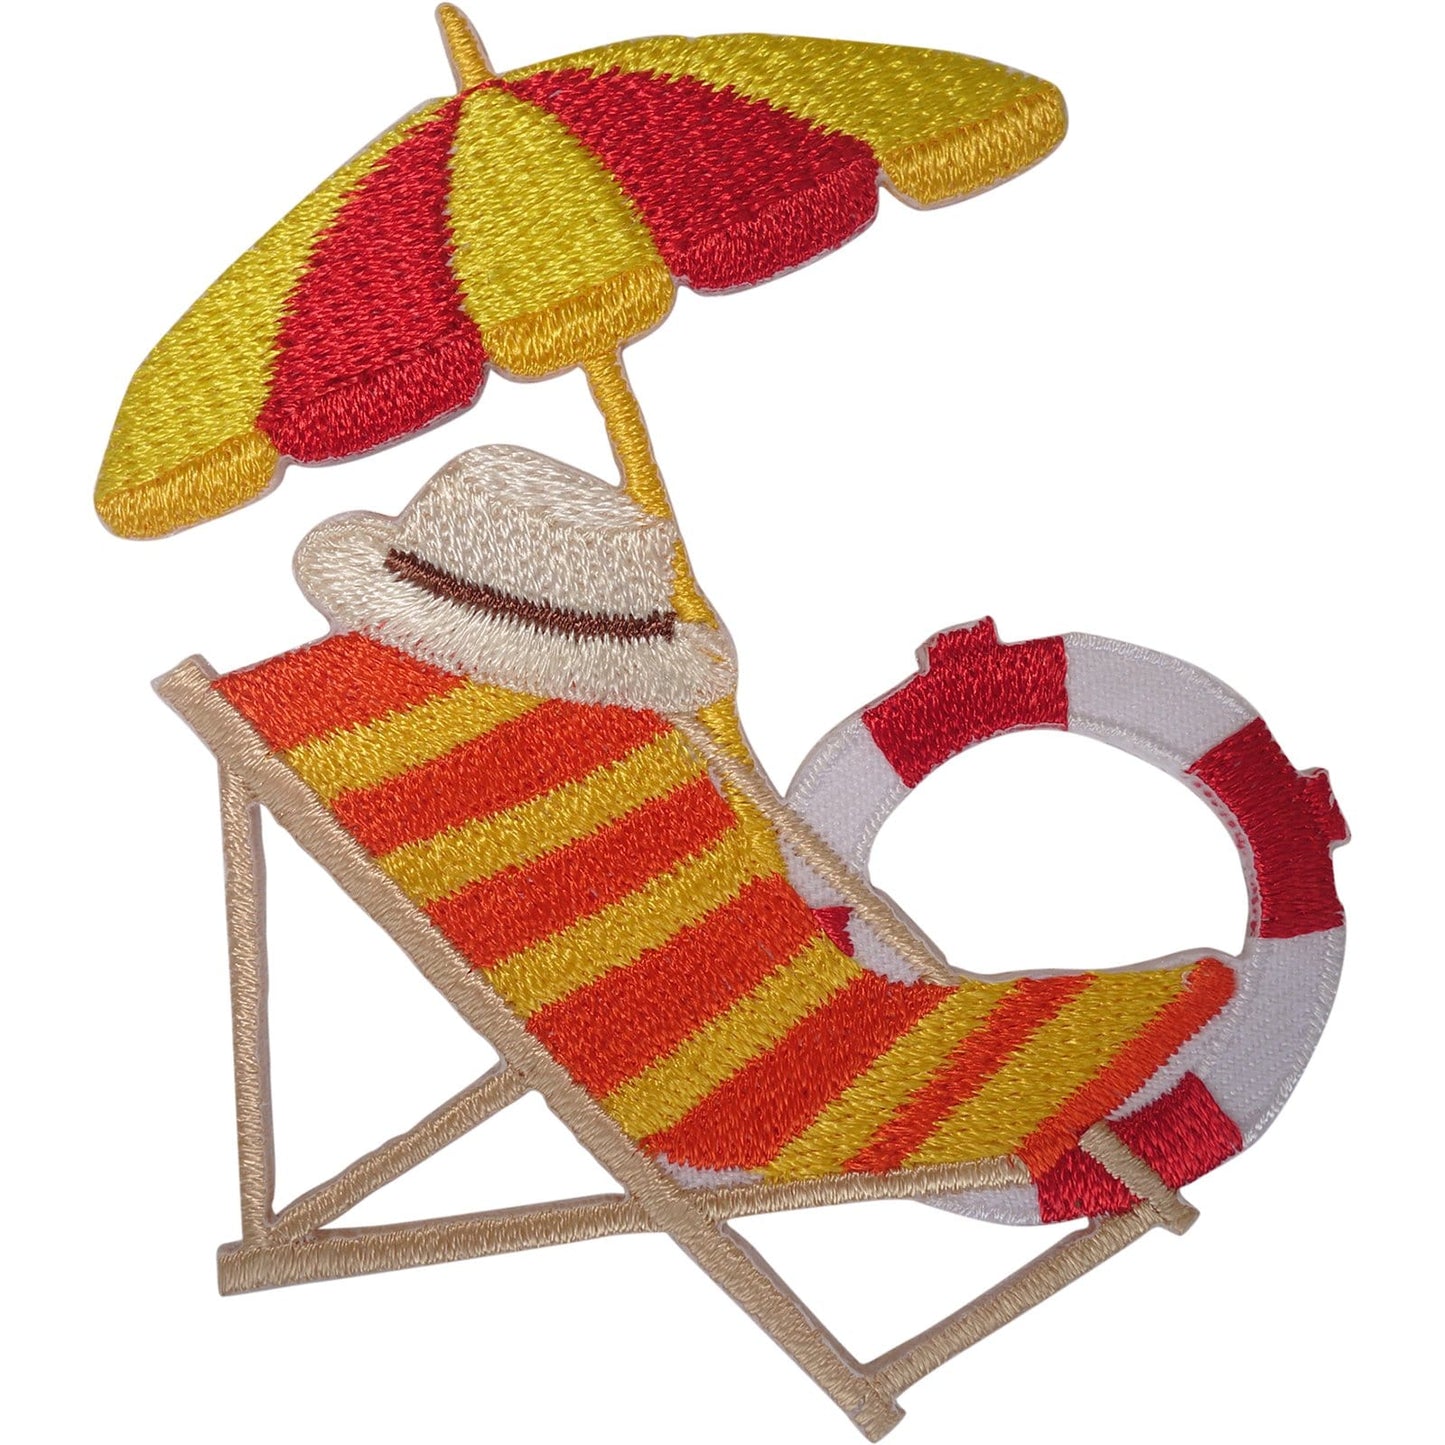 Deck Chair Parasol Umbrella Patch Iron Sew On Sun Hat Lifebuoy Embroidered Badge